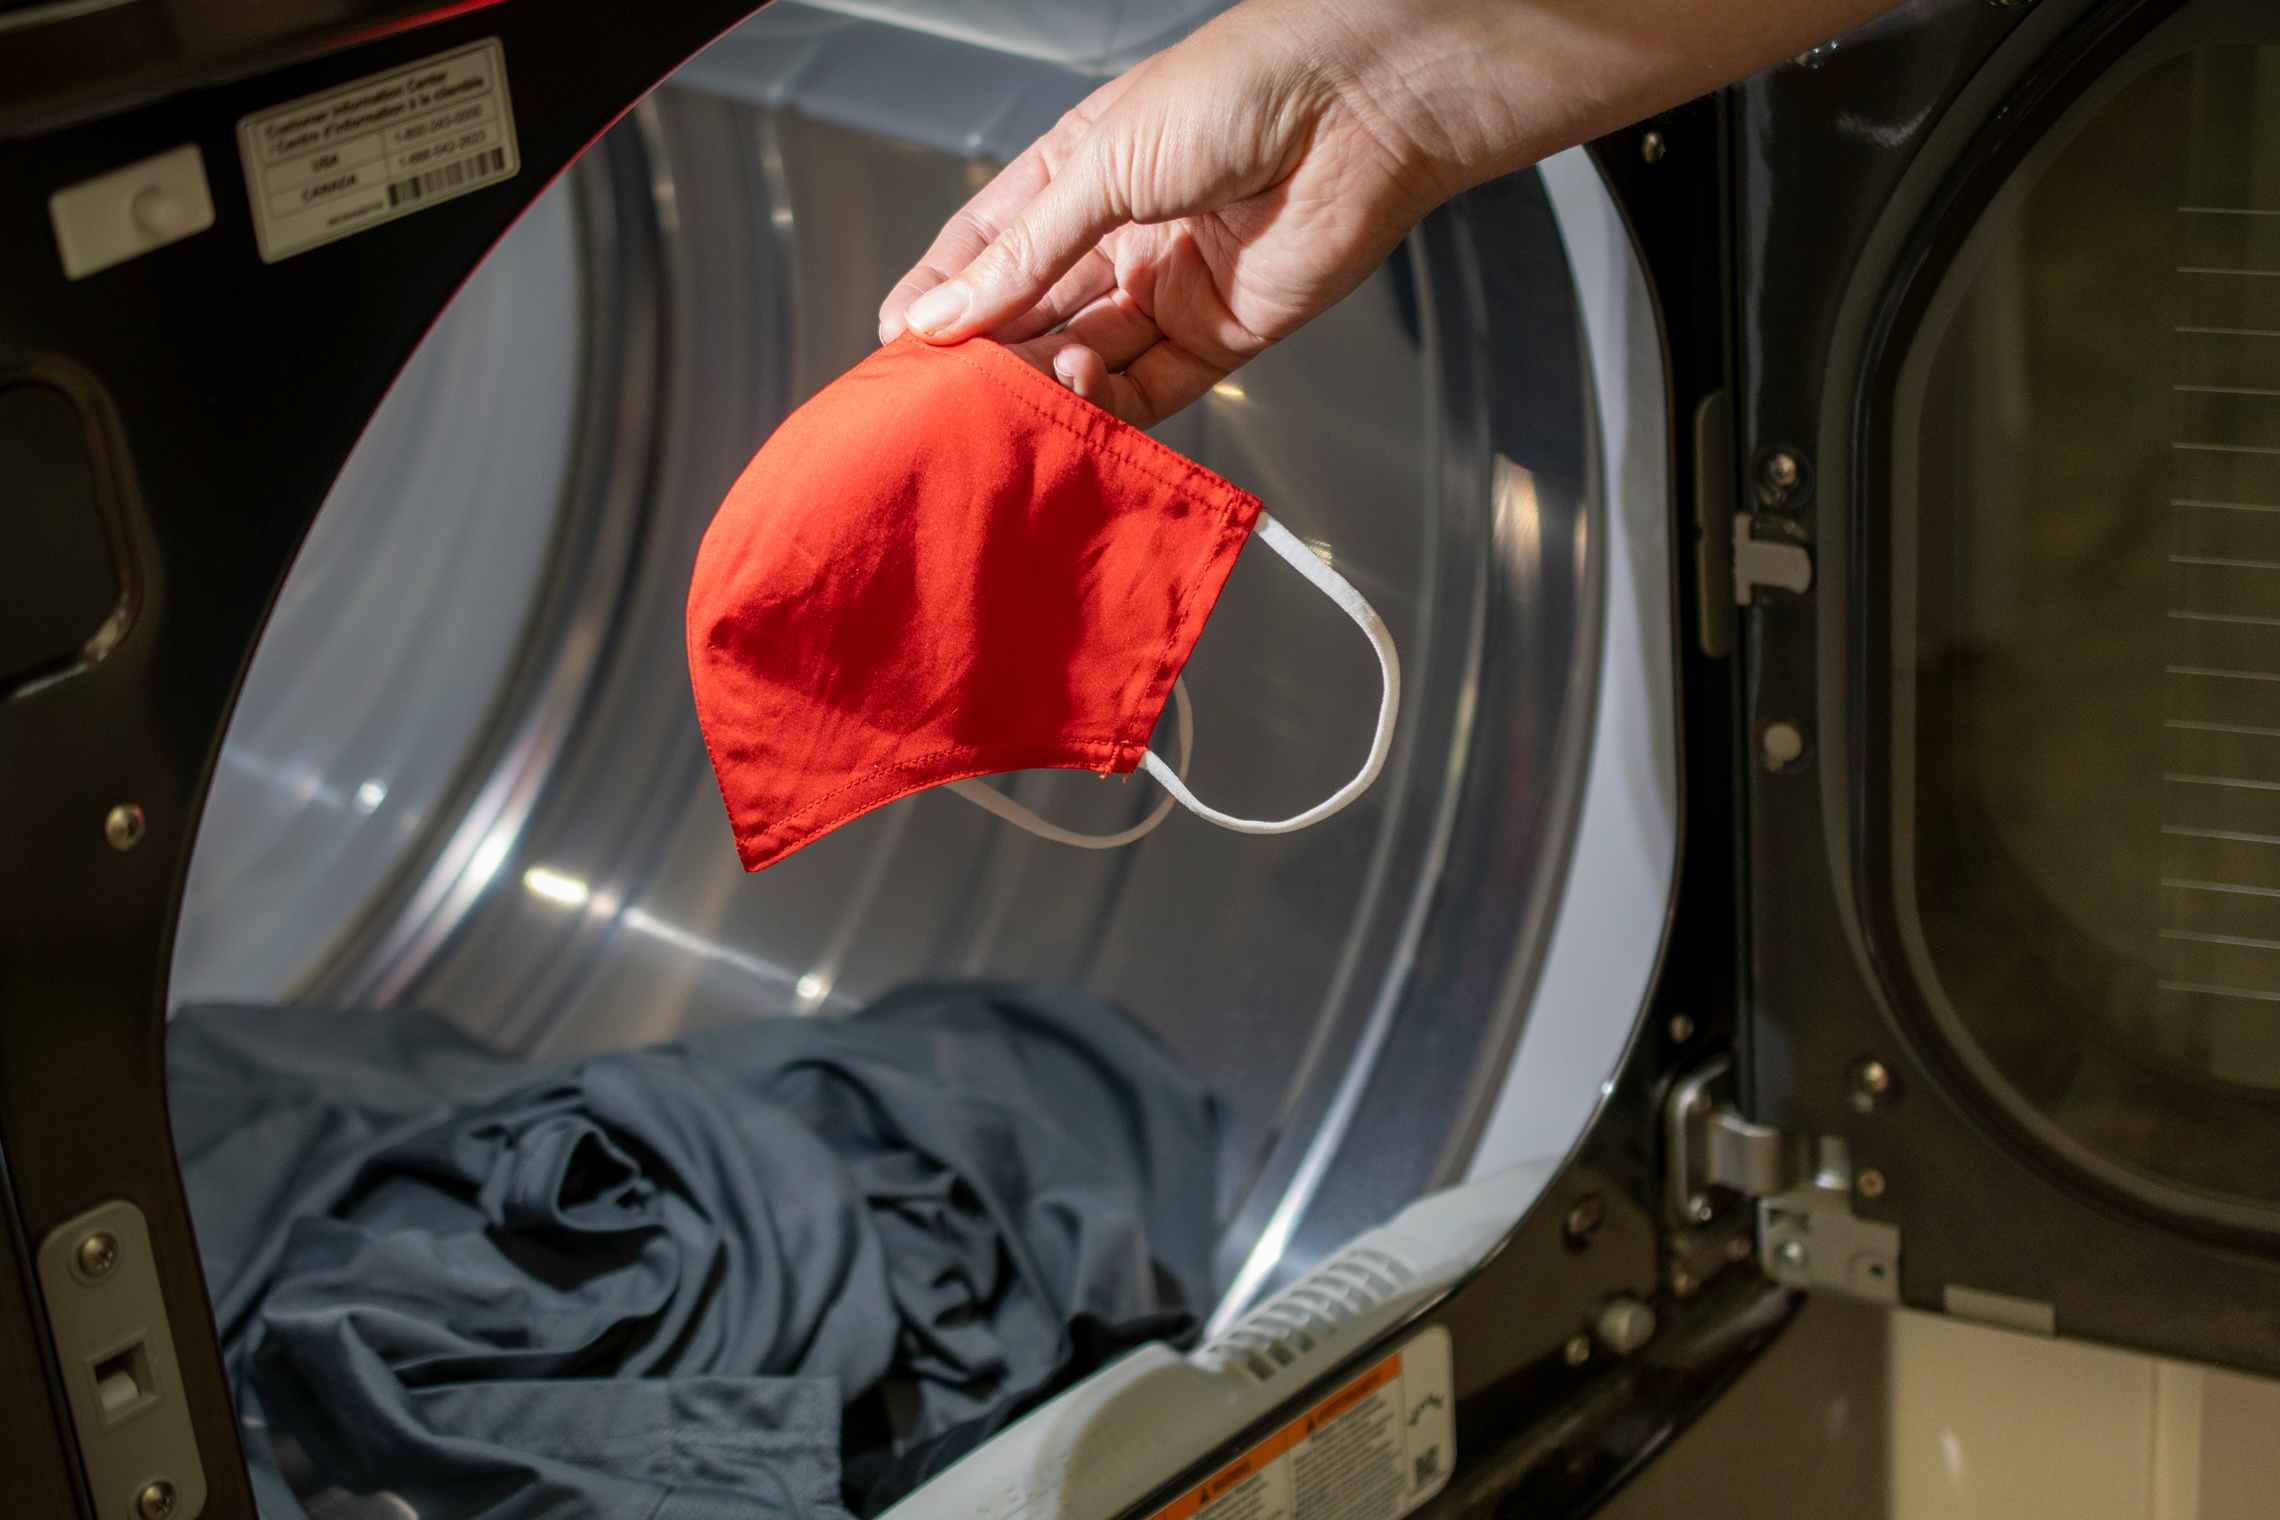 A hand tossing a fabric face mask into a dryer.